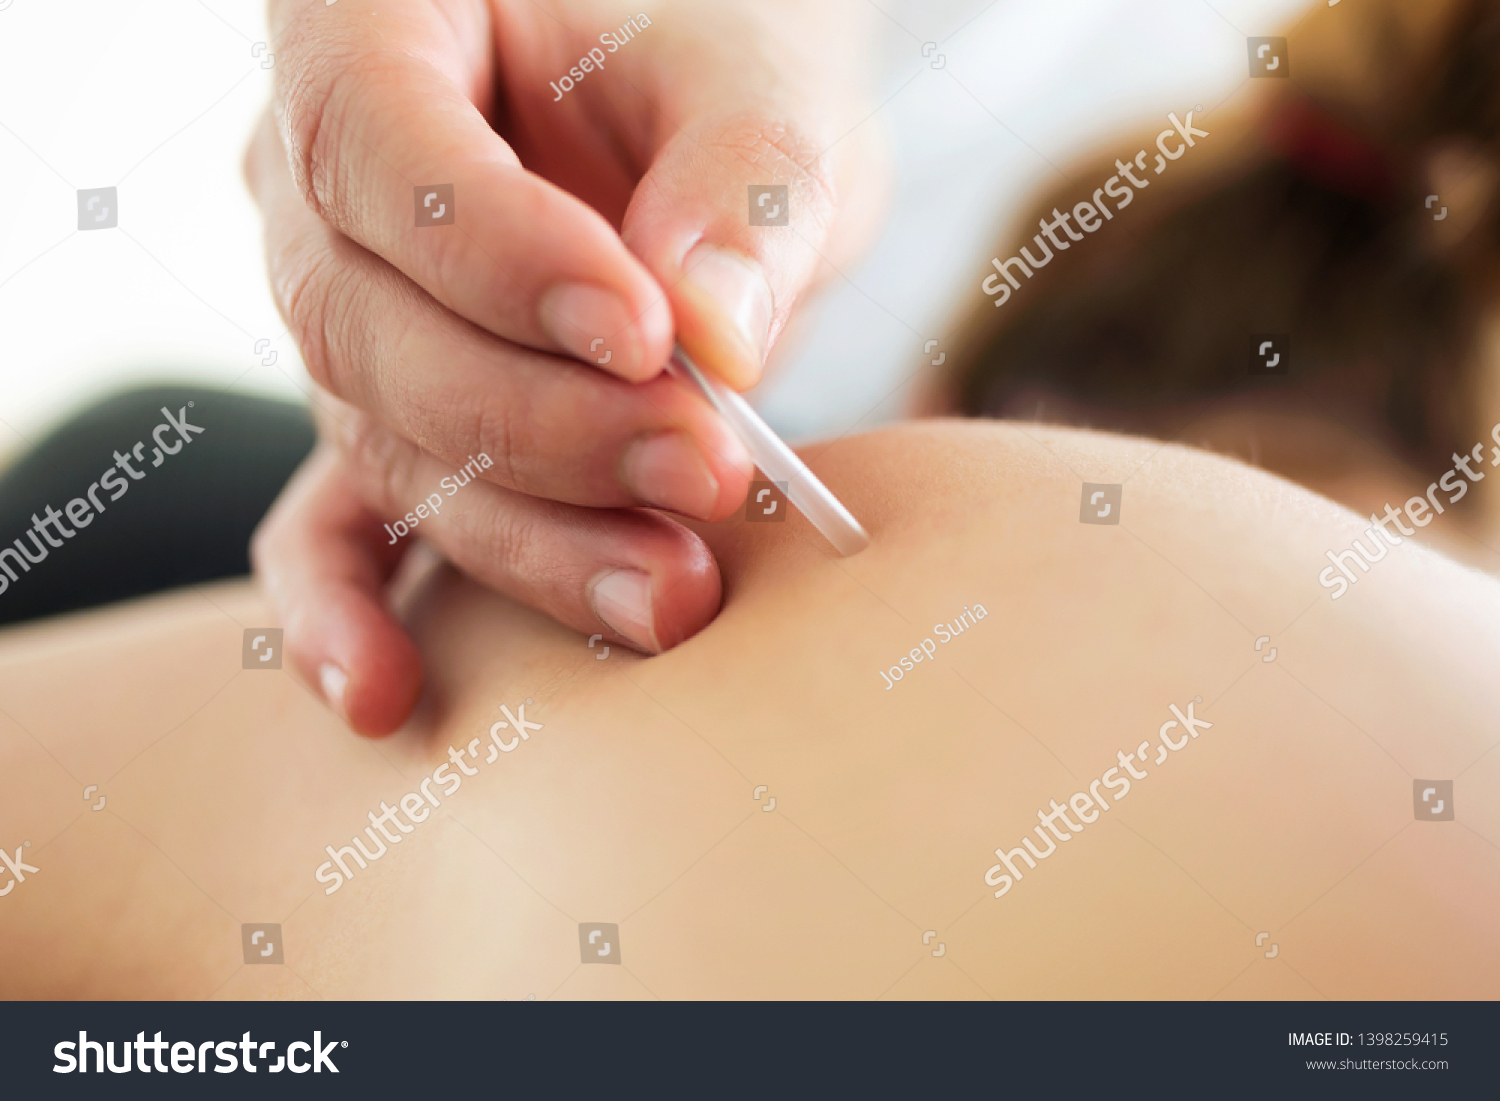 Close-up of young physiotherapist doing a trigger point injection in patient back. #1398259415